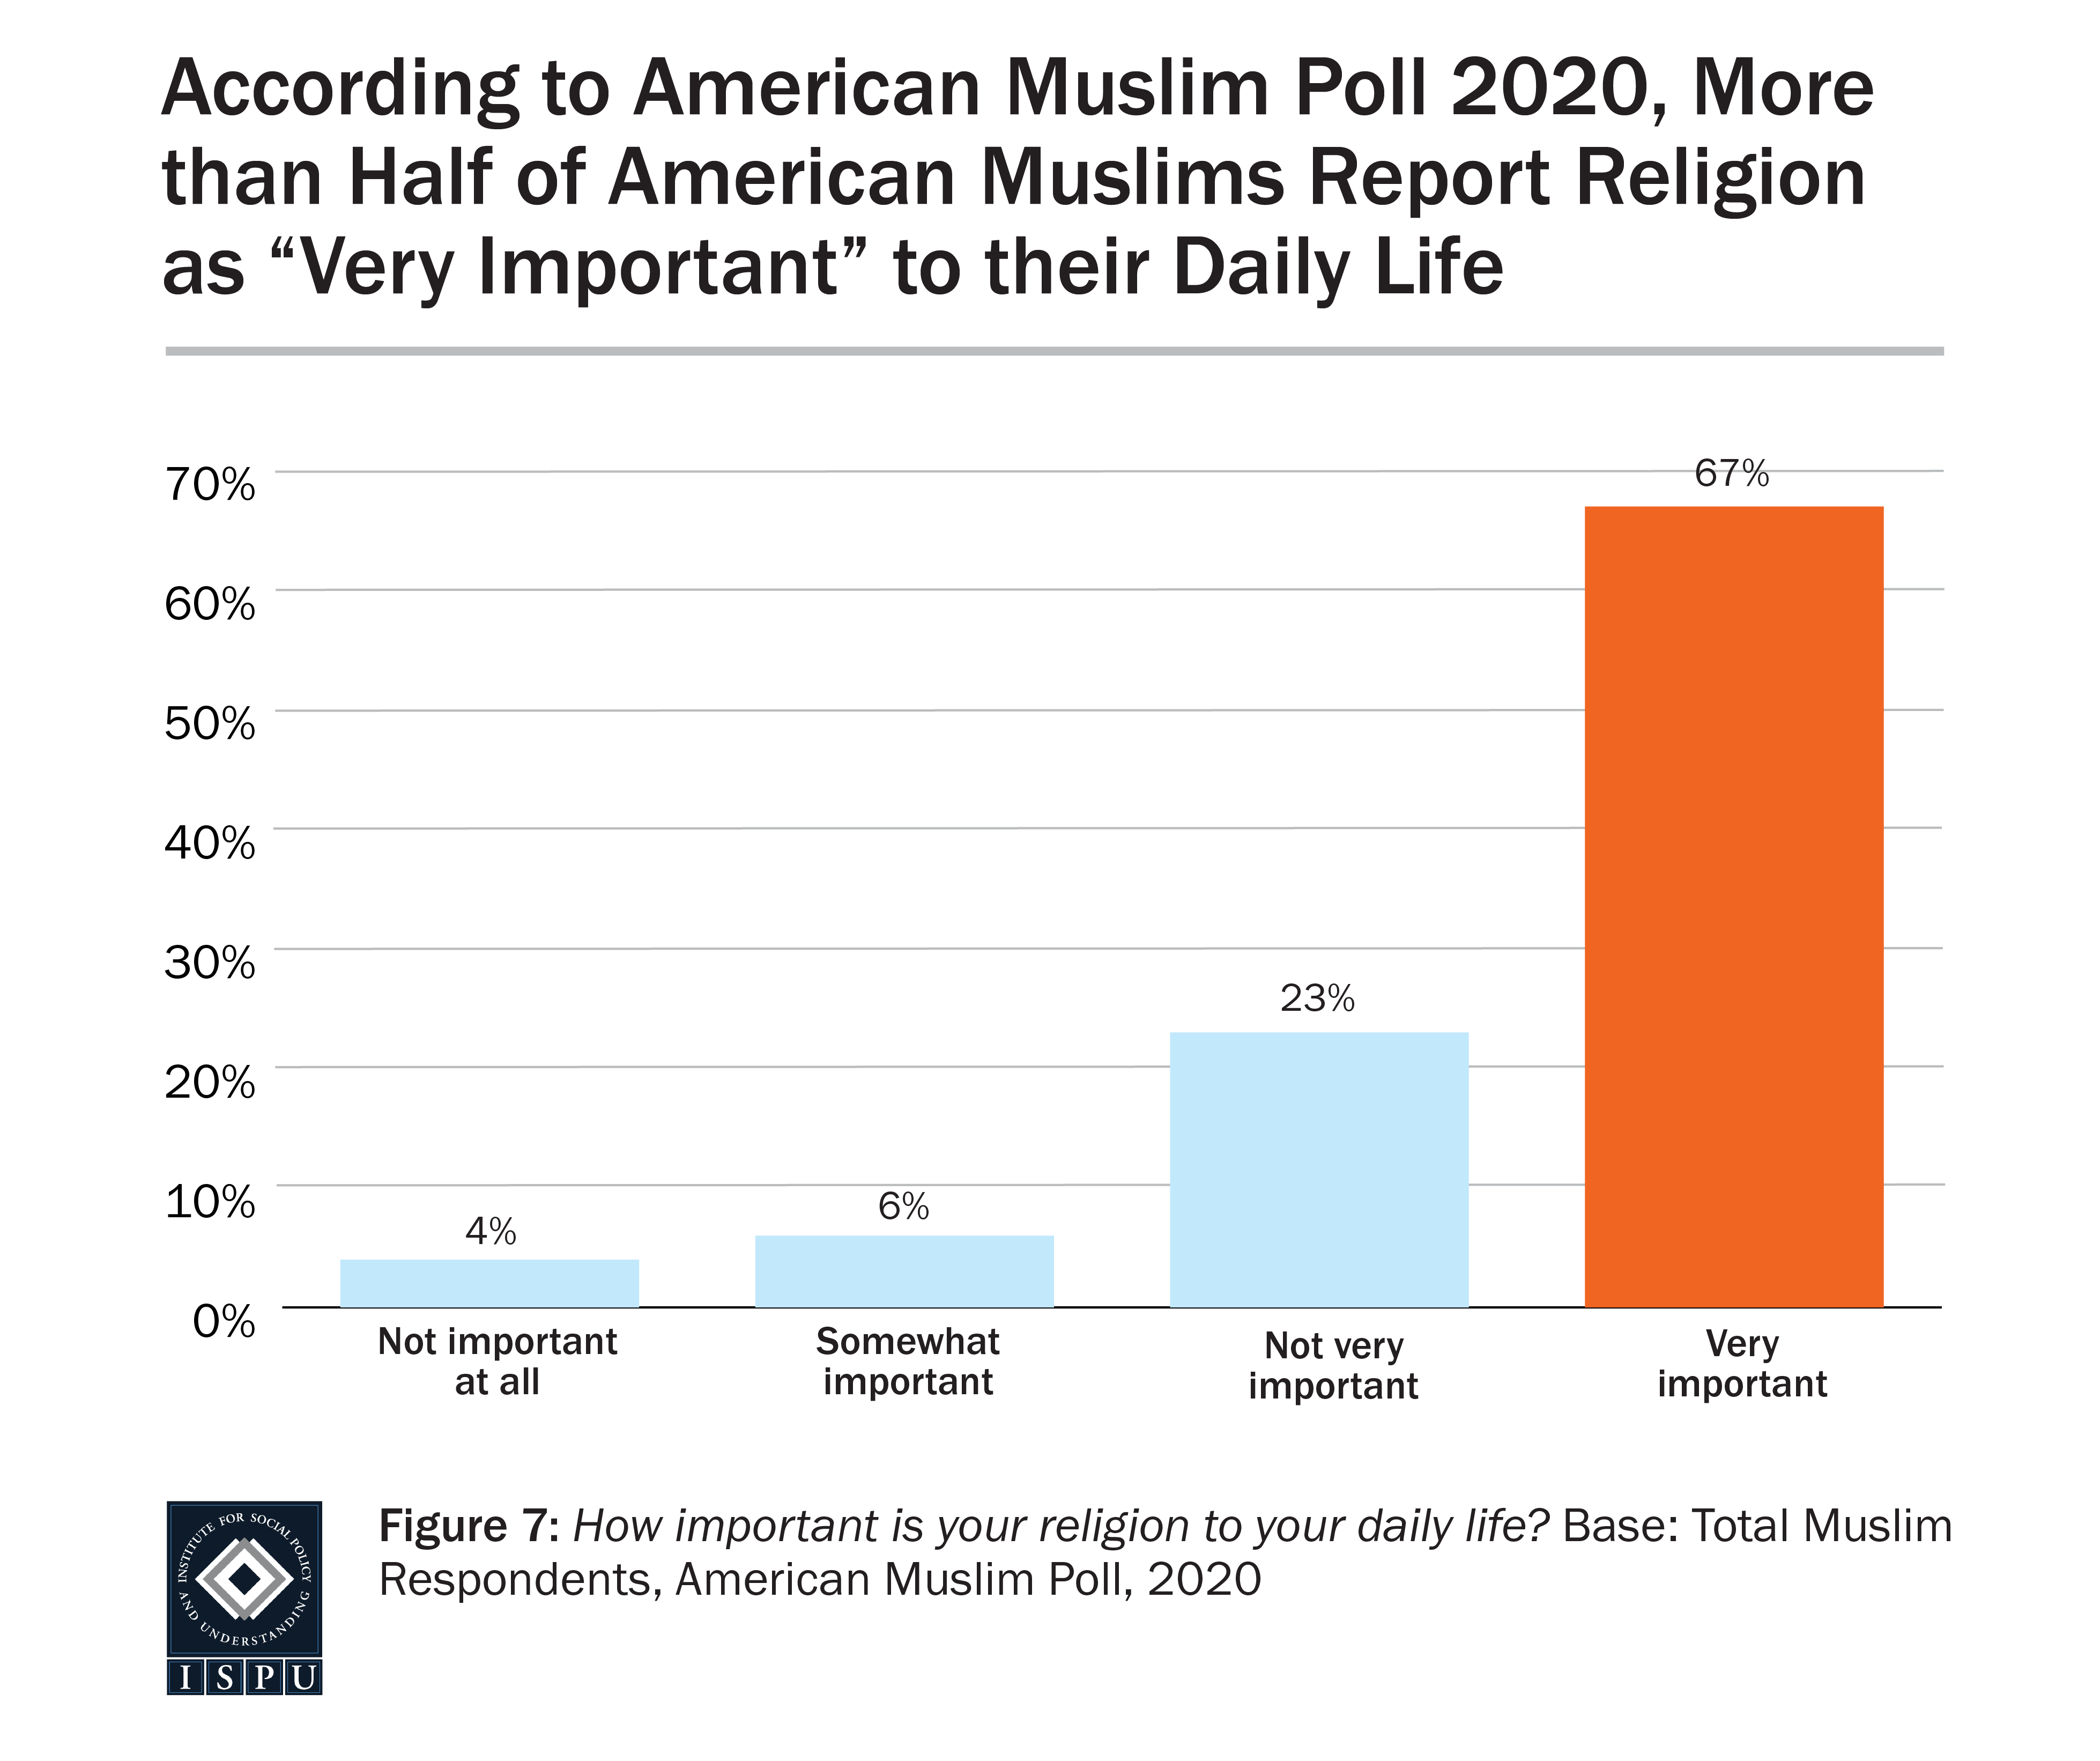 Graph displaying: bar graph of American Muslim respondents of the American Muslim Poll 2020 reporting religion as being very important in their daily life